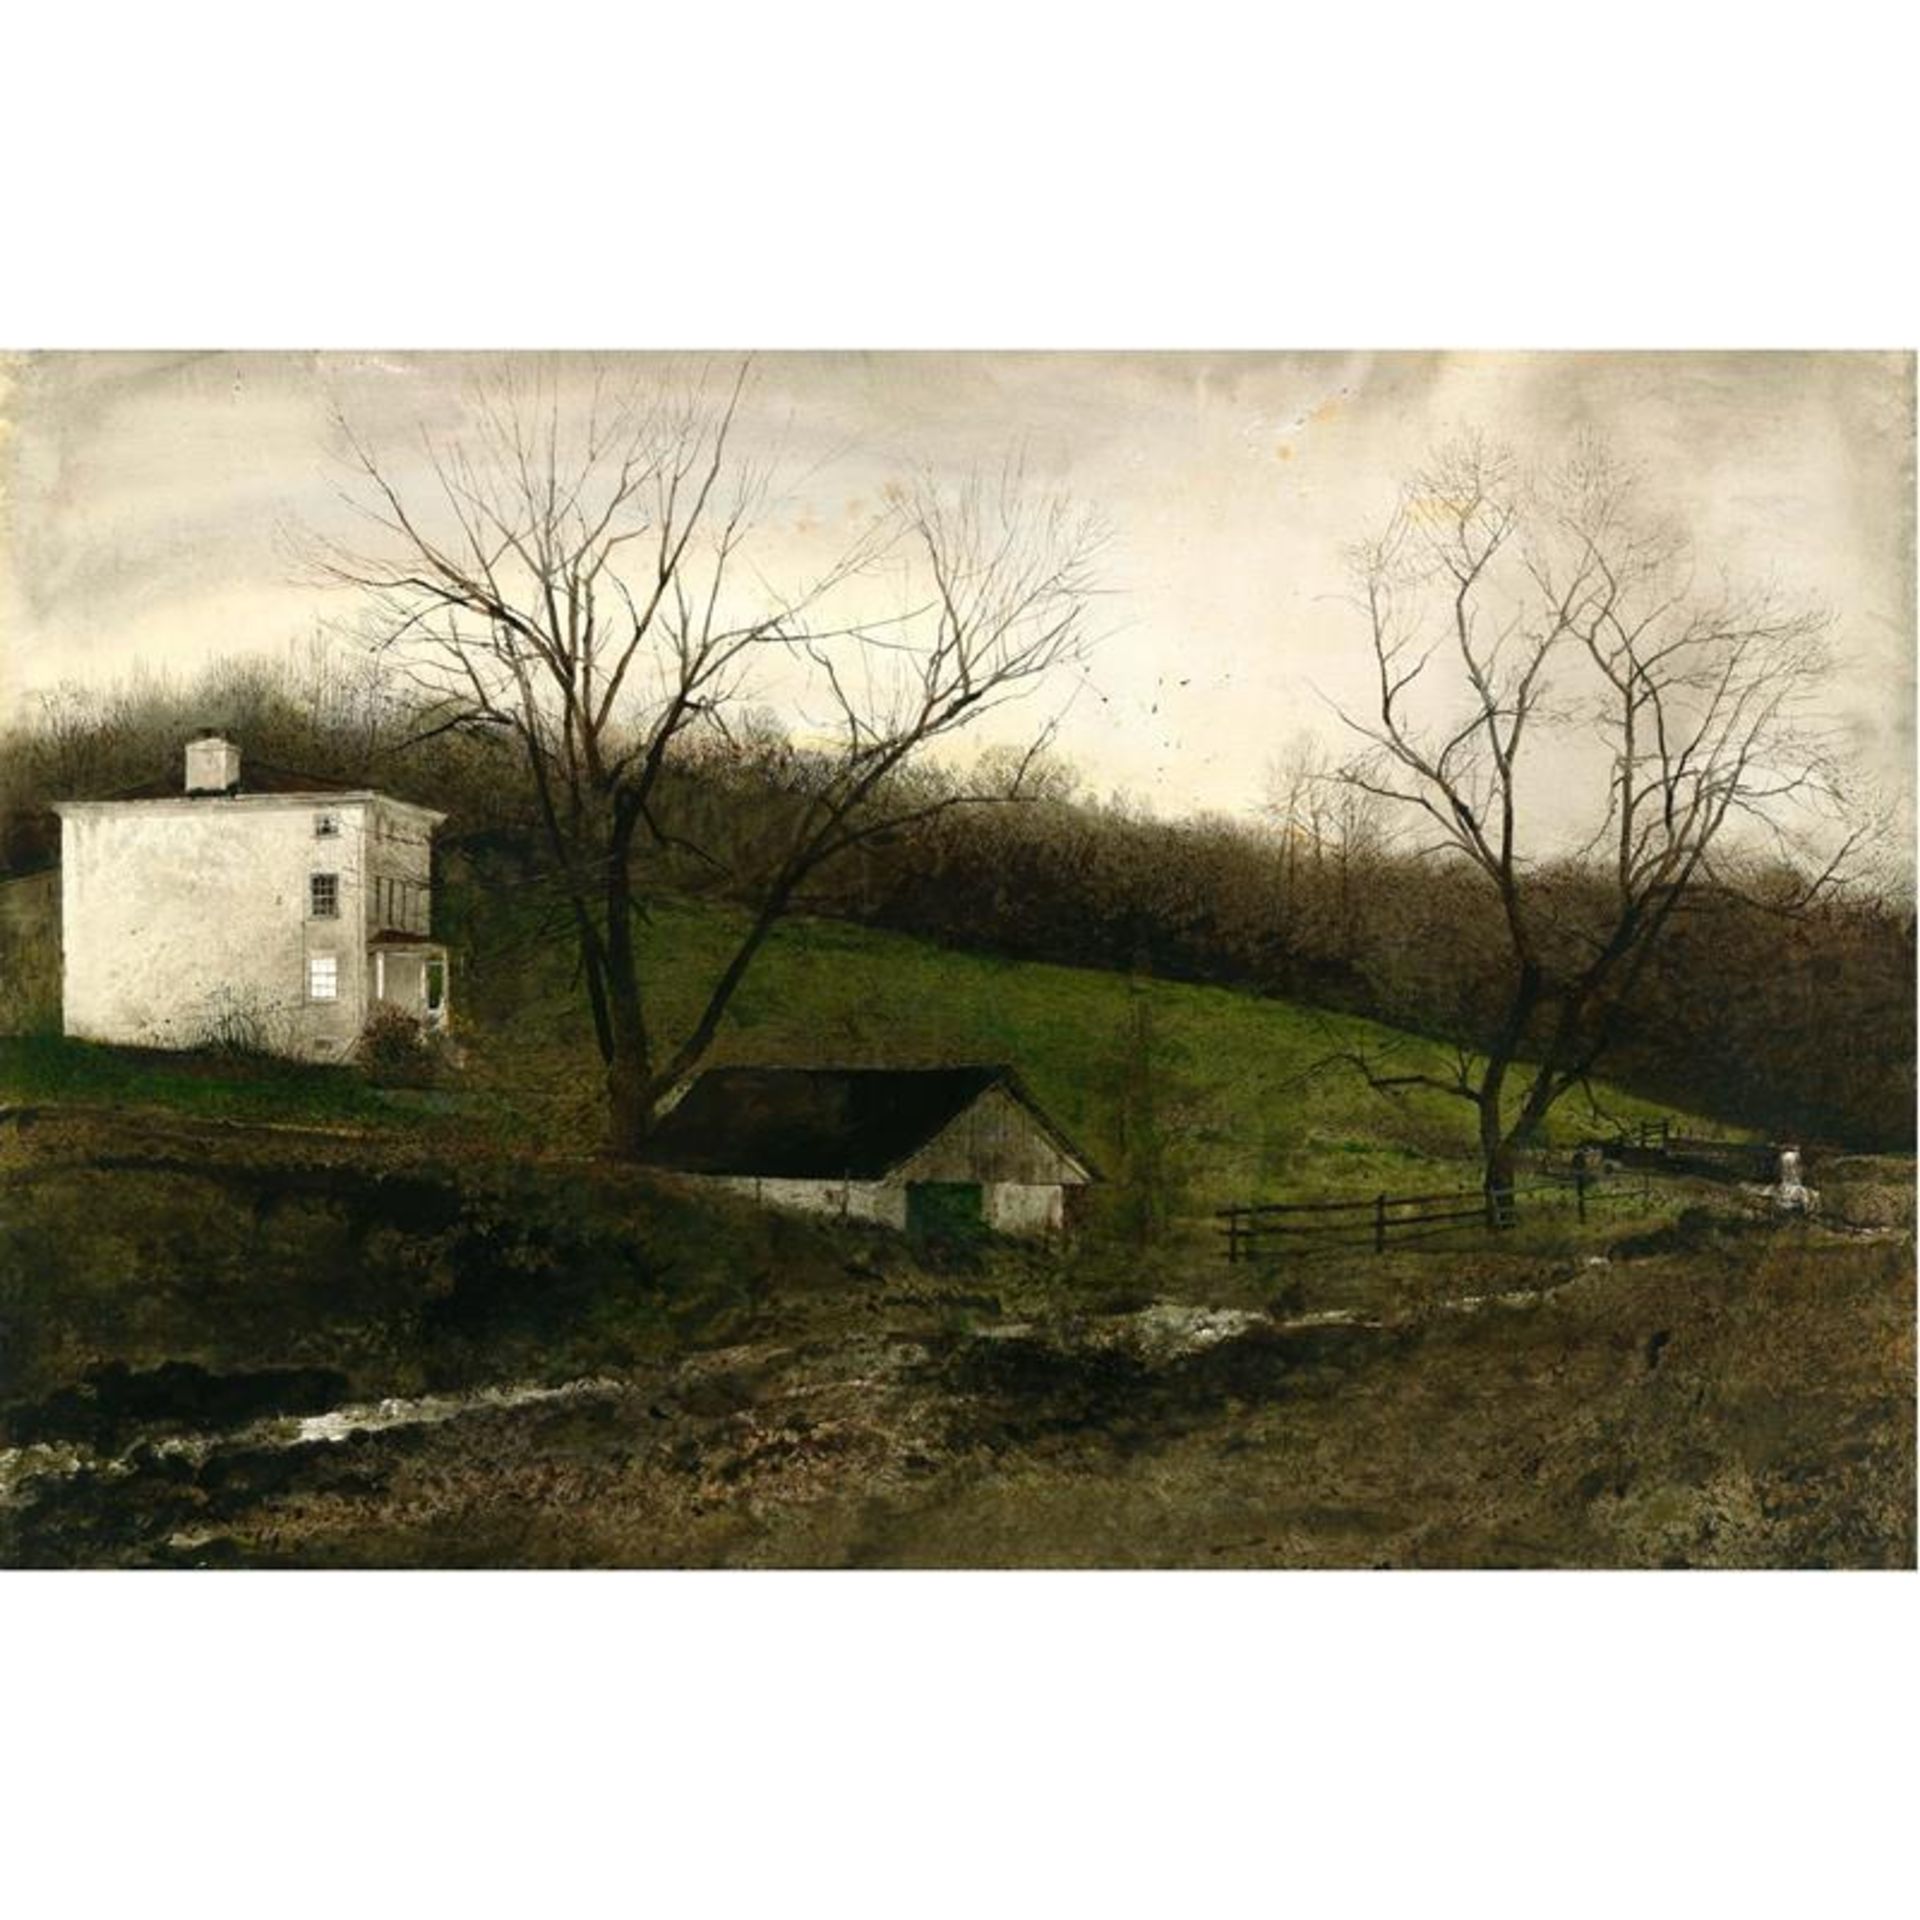 Andrew Wyeth "Evening at Kuerners, 1970" Offset Lithograph